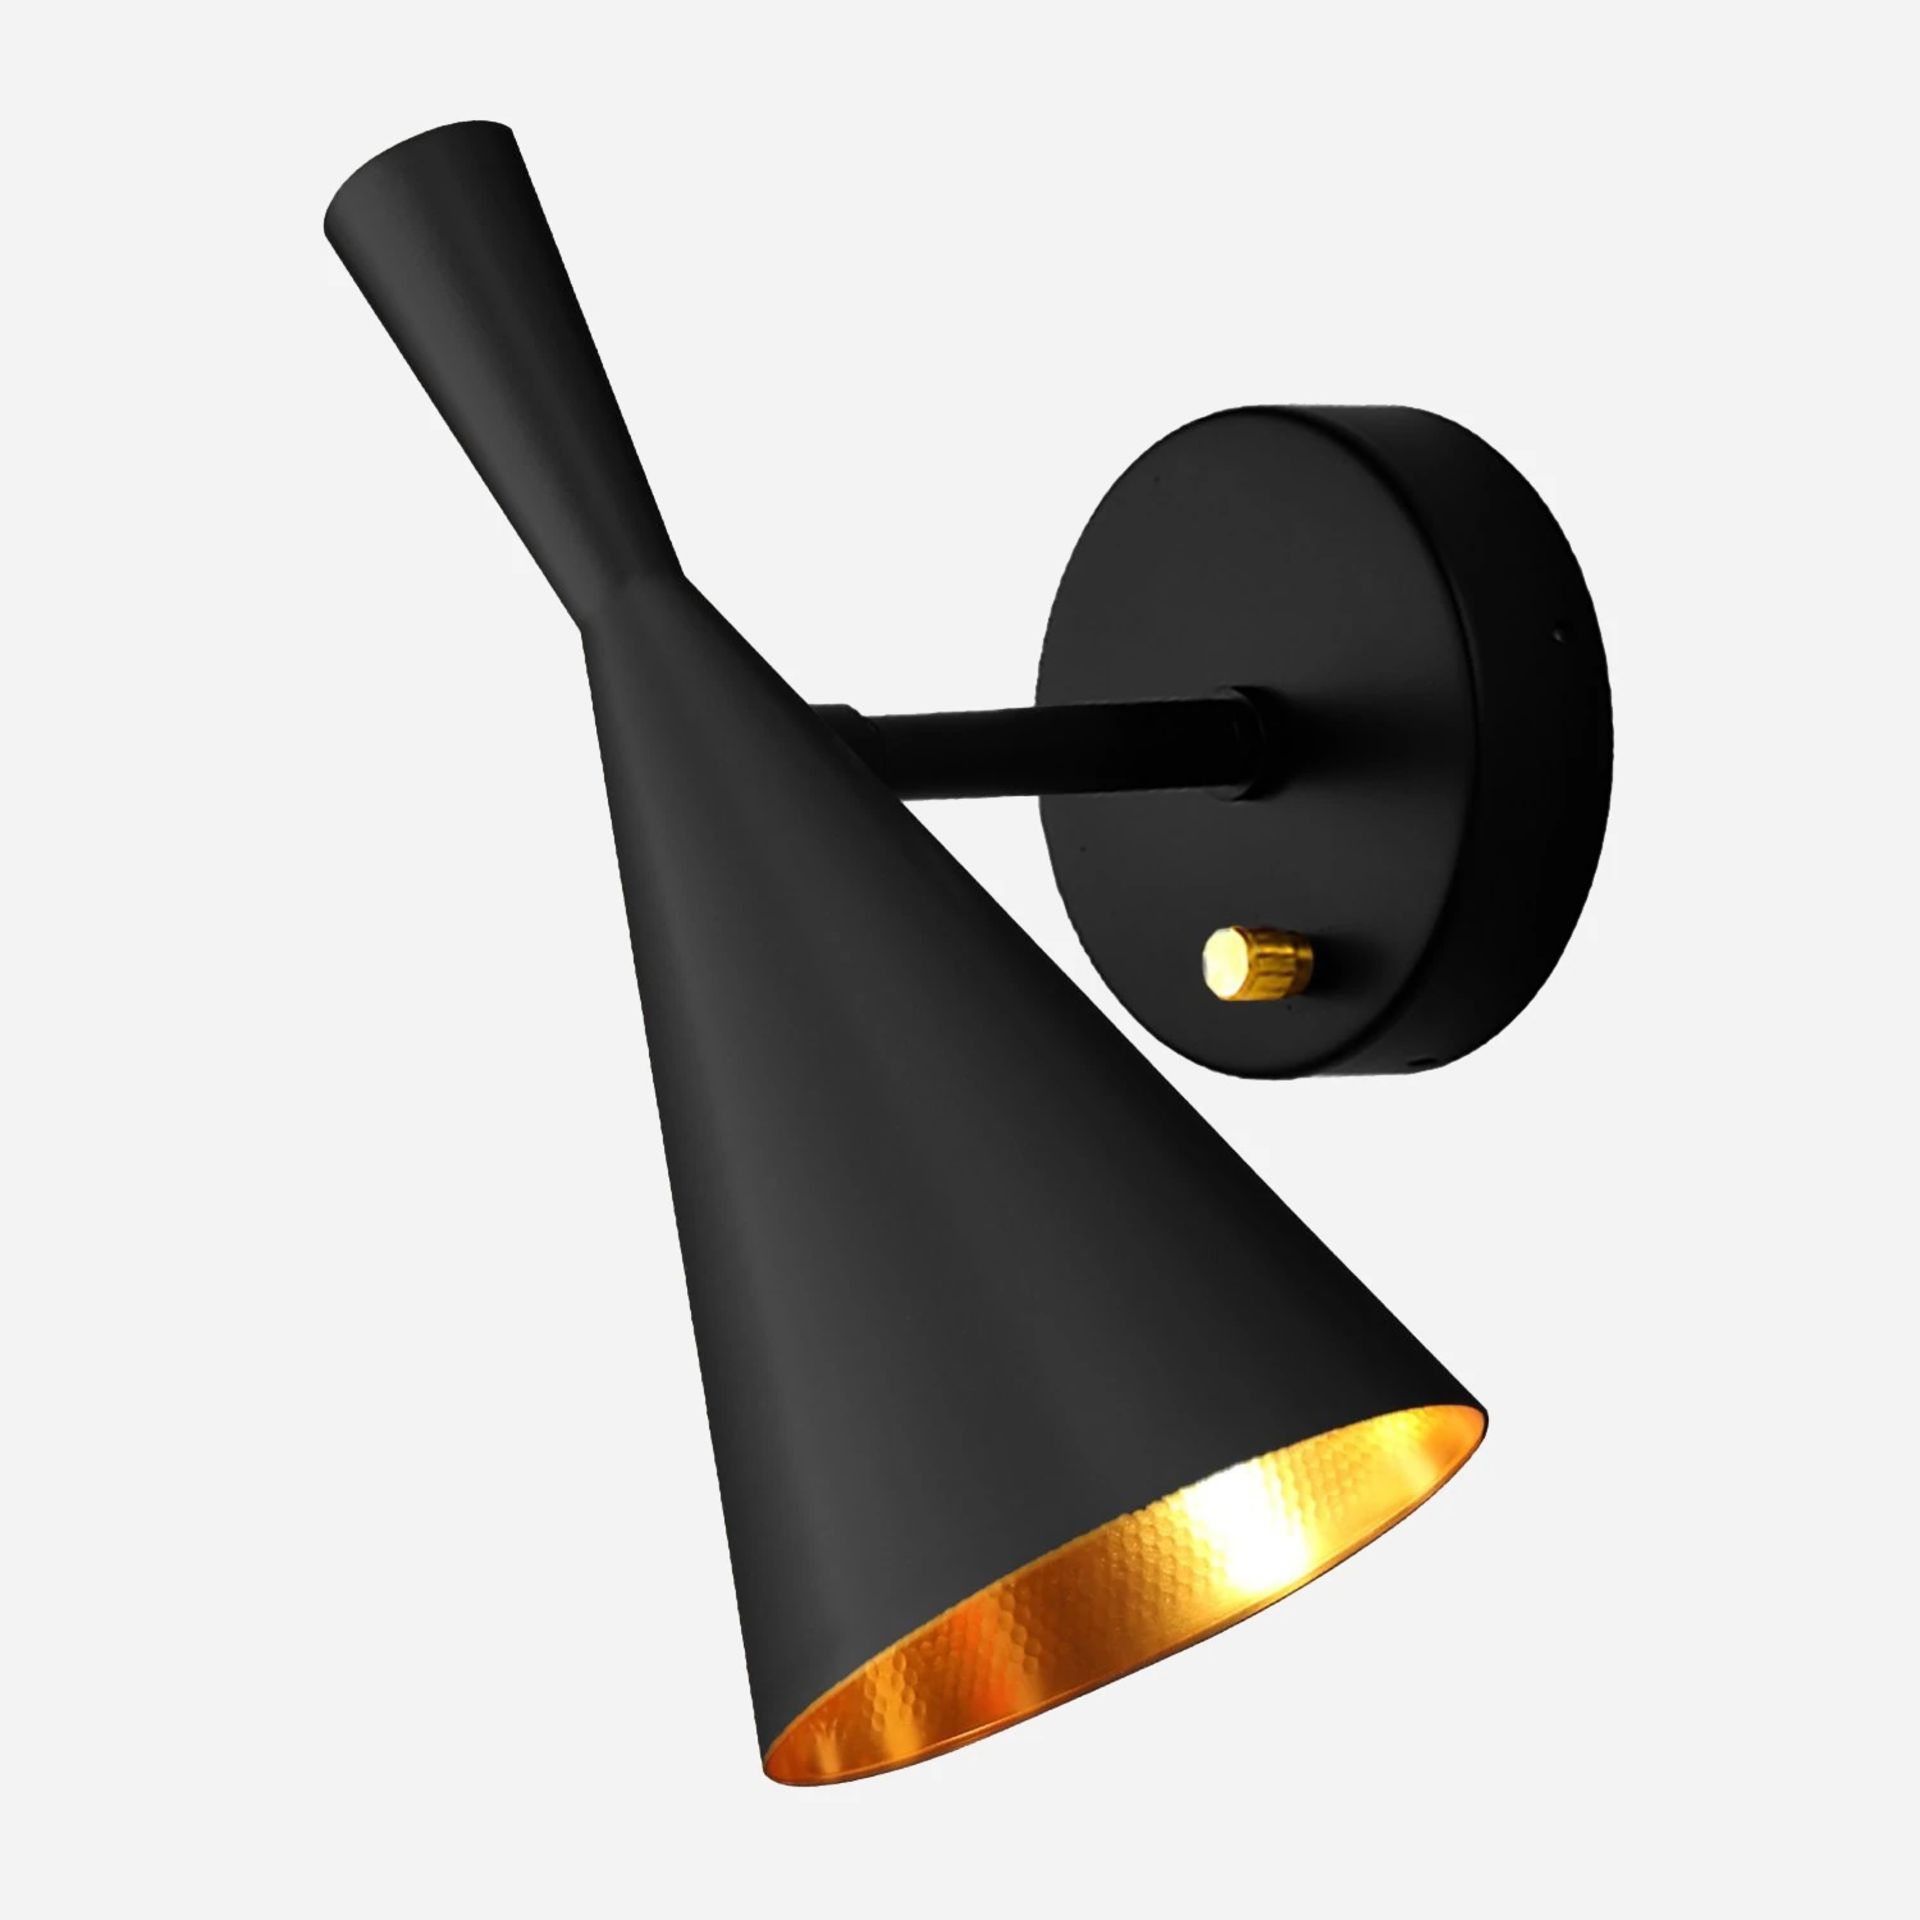 Funk Wall Light Copper and Black A sleek range for contemporary living, The Funk Wall Light is